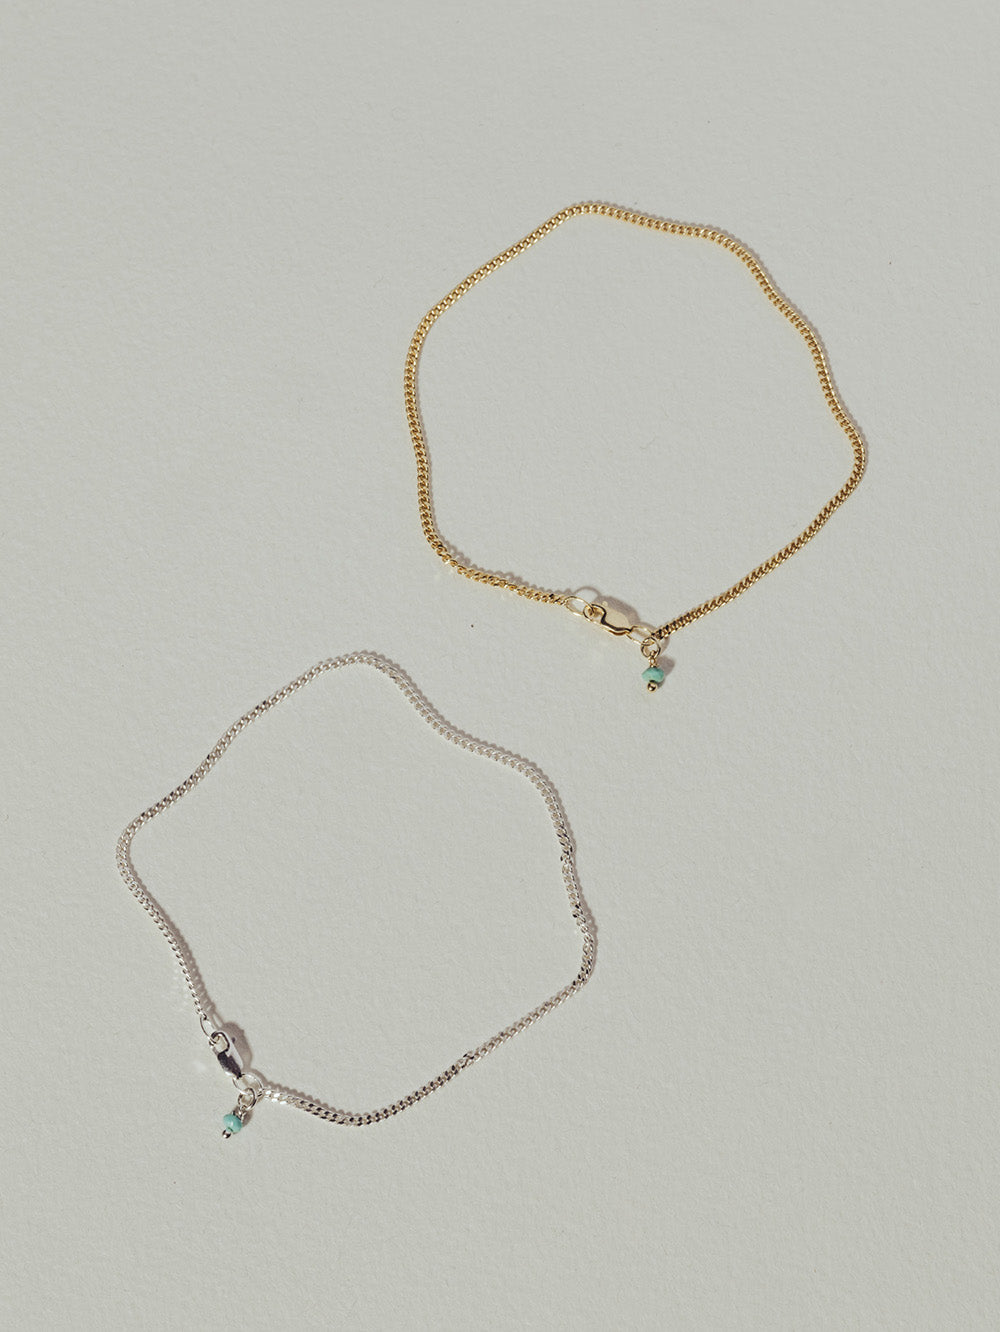 Birthstone December - Turquoise | 925 Sterling Silver